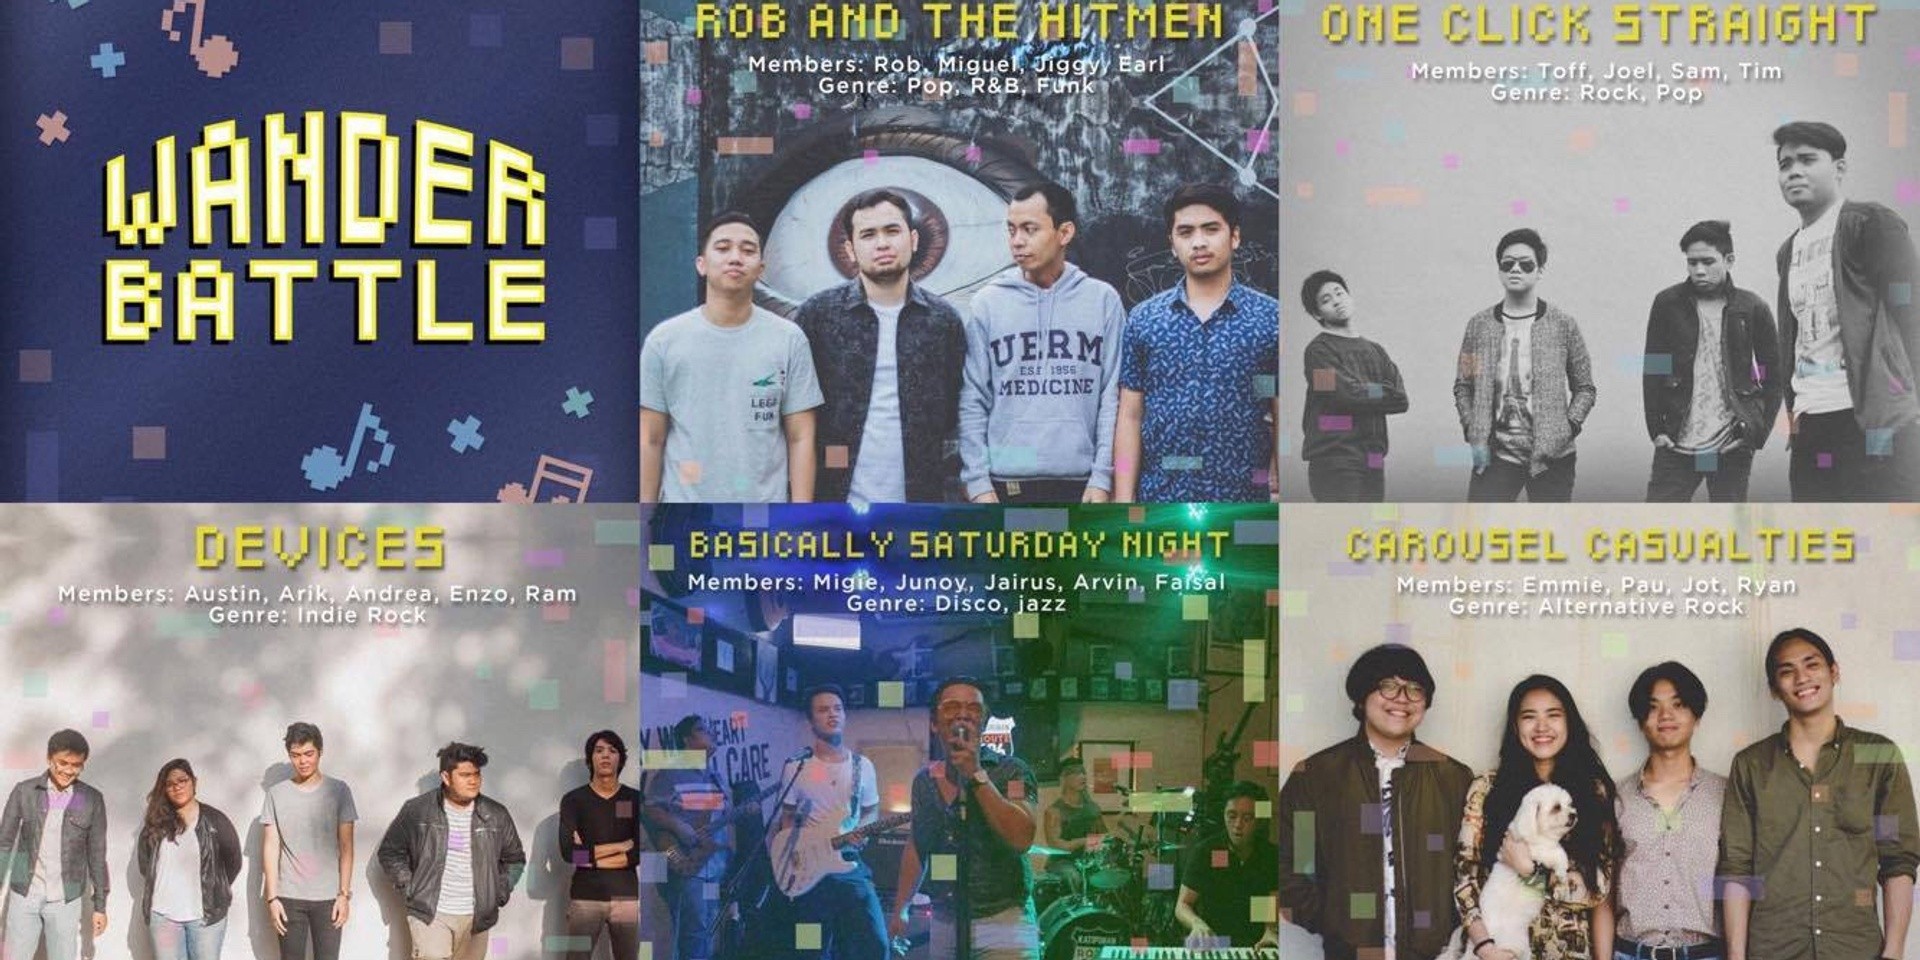 5 bands to battle it out for the title of Wanderband 2018